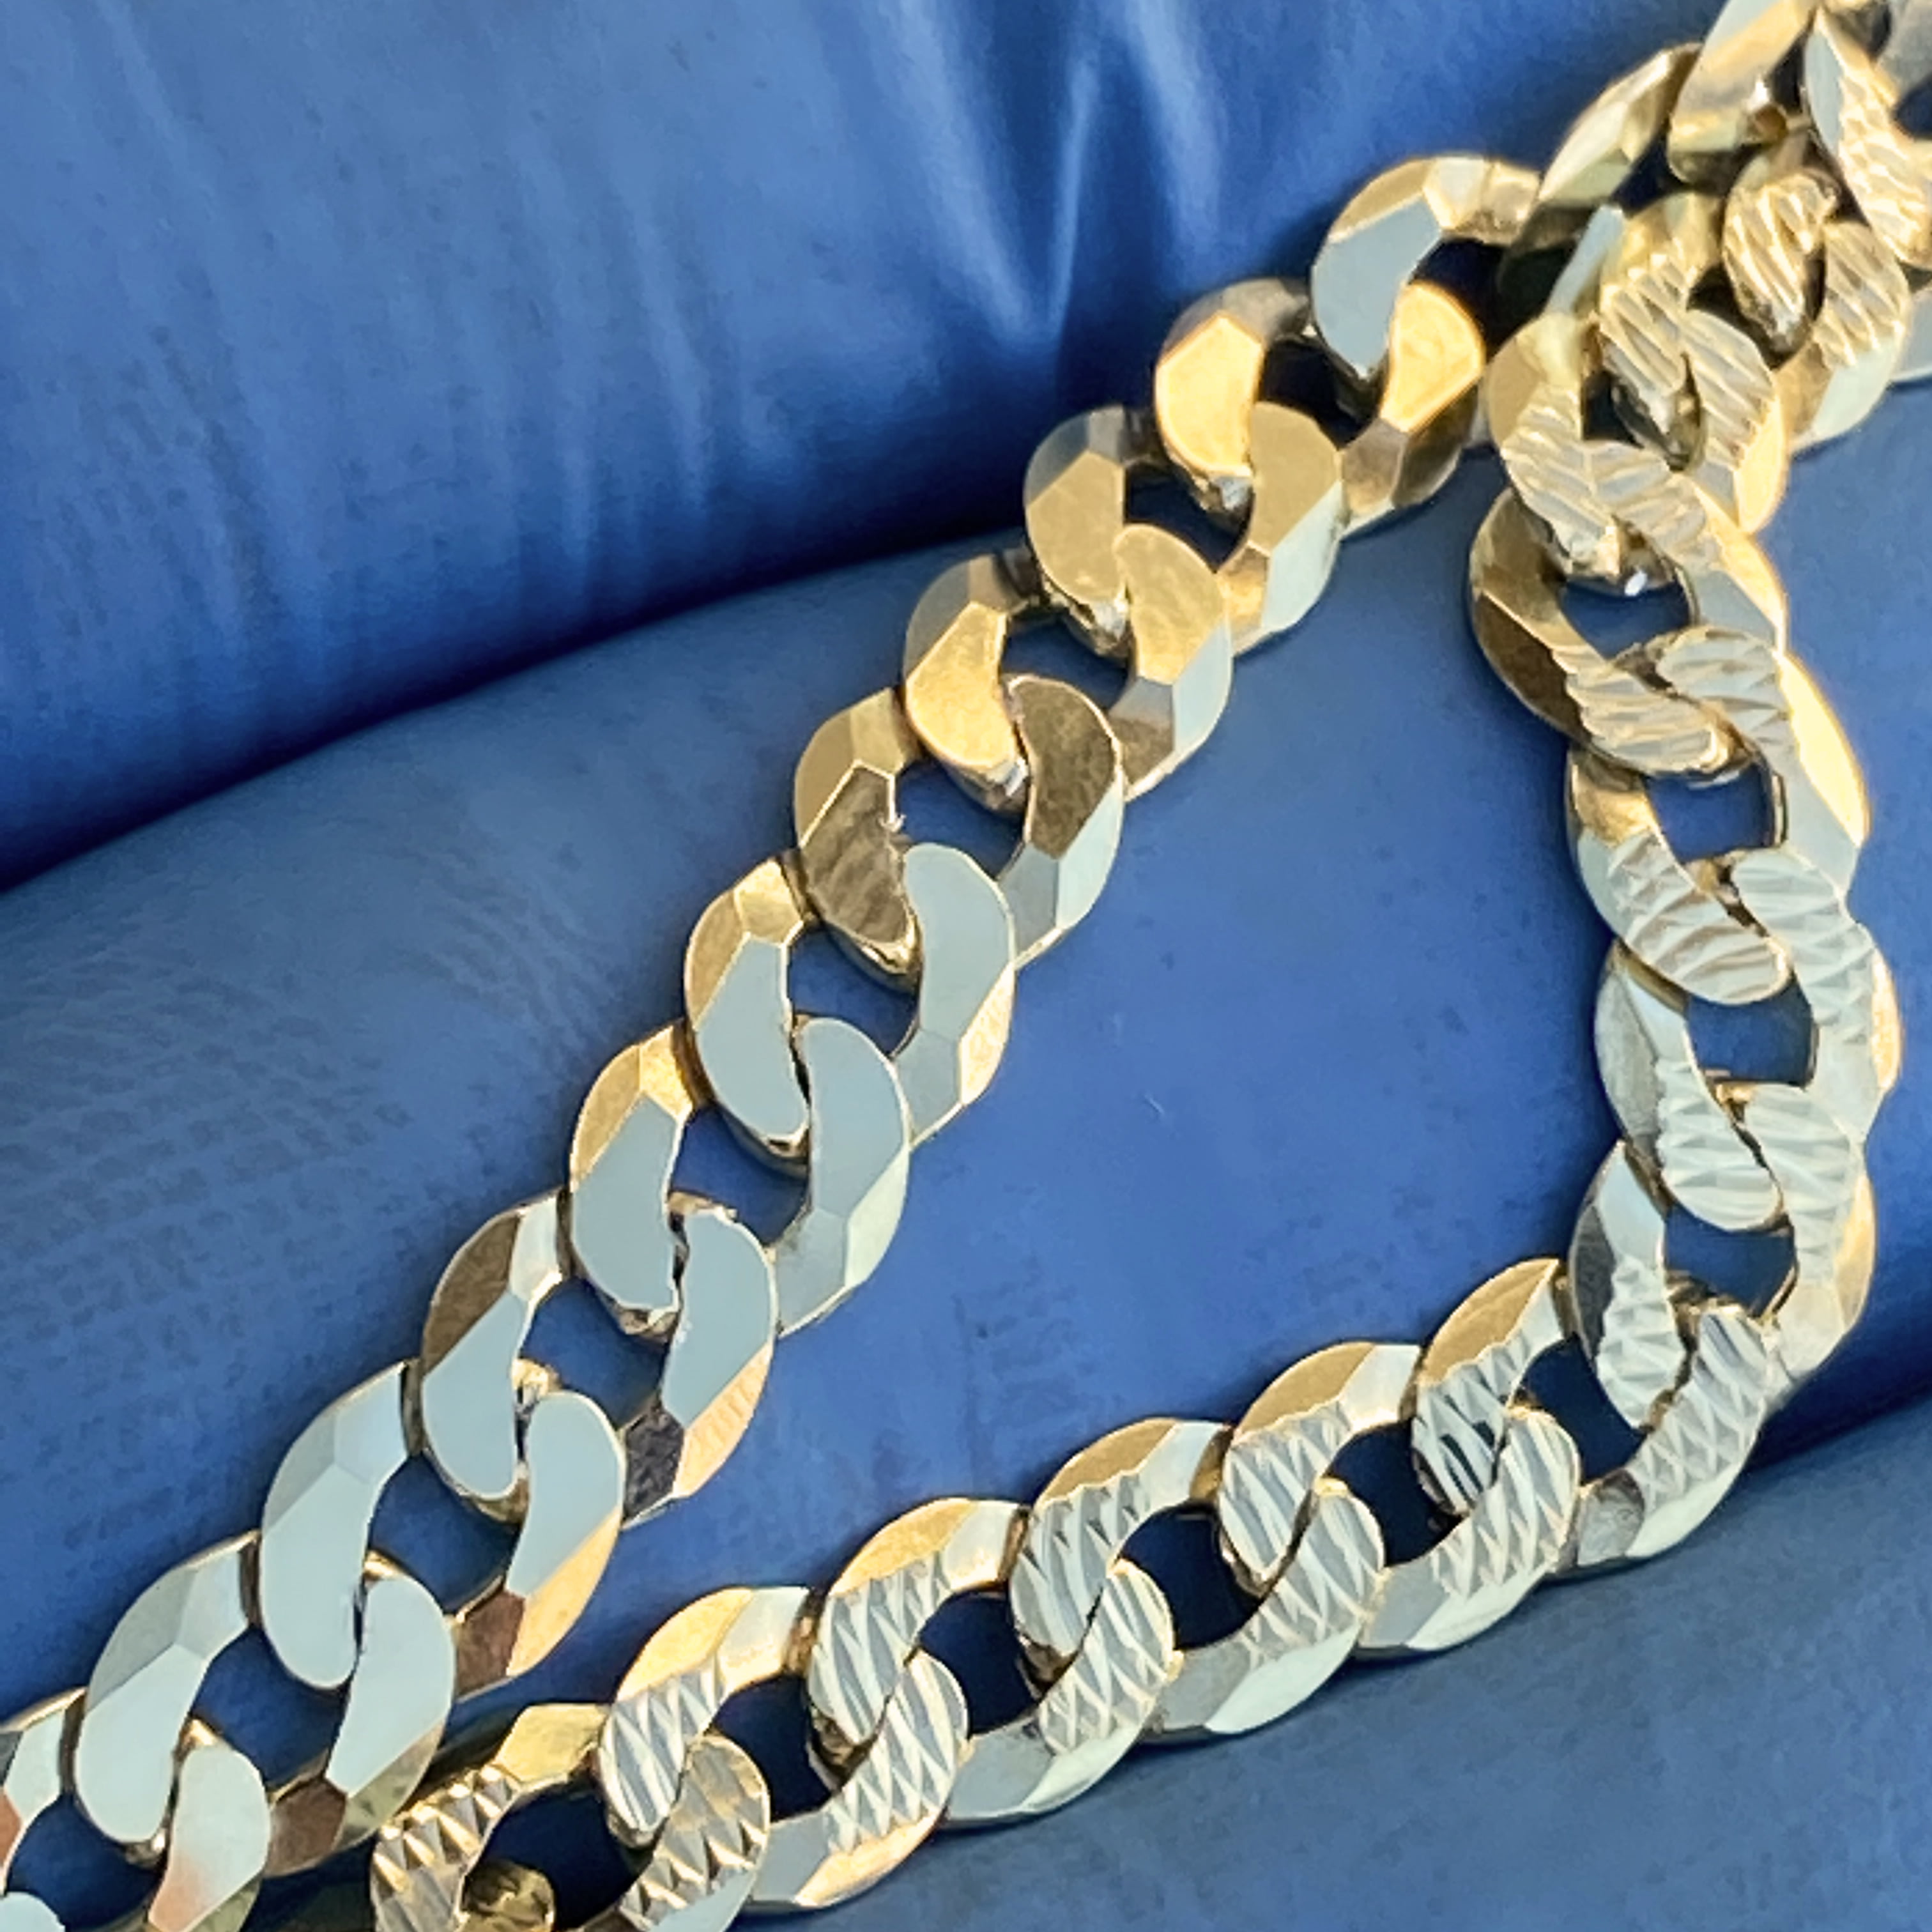 50 75 100cm 40 45 95 25 30 35 80 70 15 1mm thick 14k gold plated on solid sterling silver 925 Italian diamond cut BOX link style chain necklace bracelet anklet 55 20 90 60 65 85